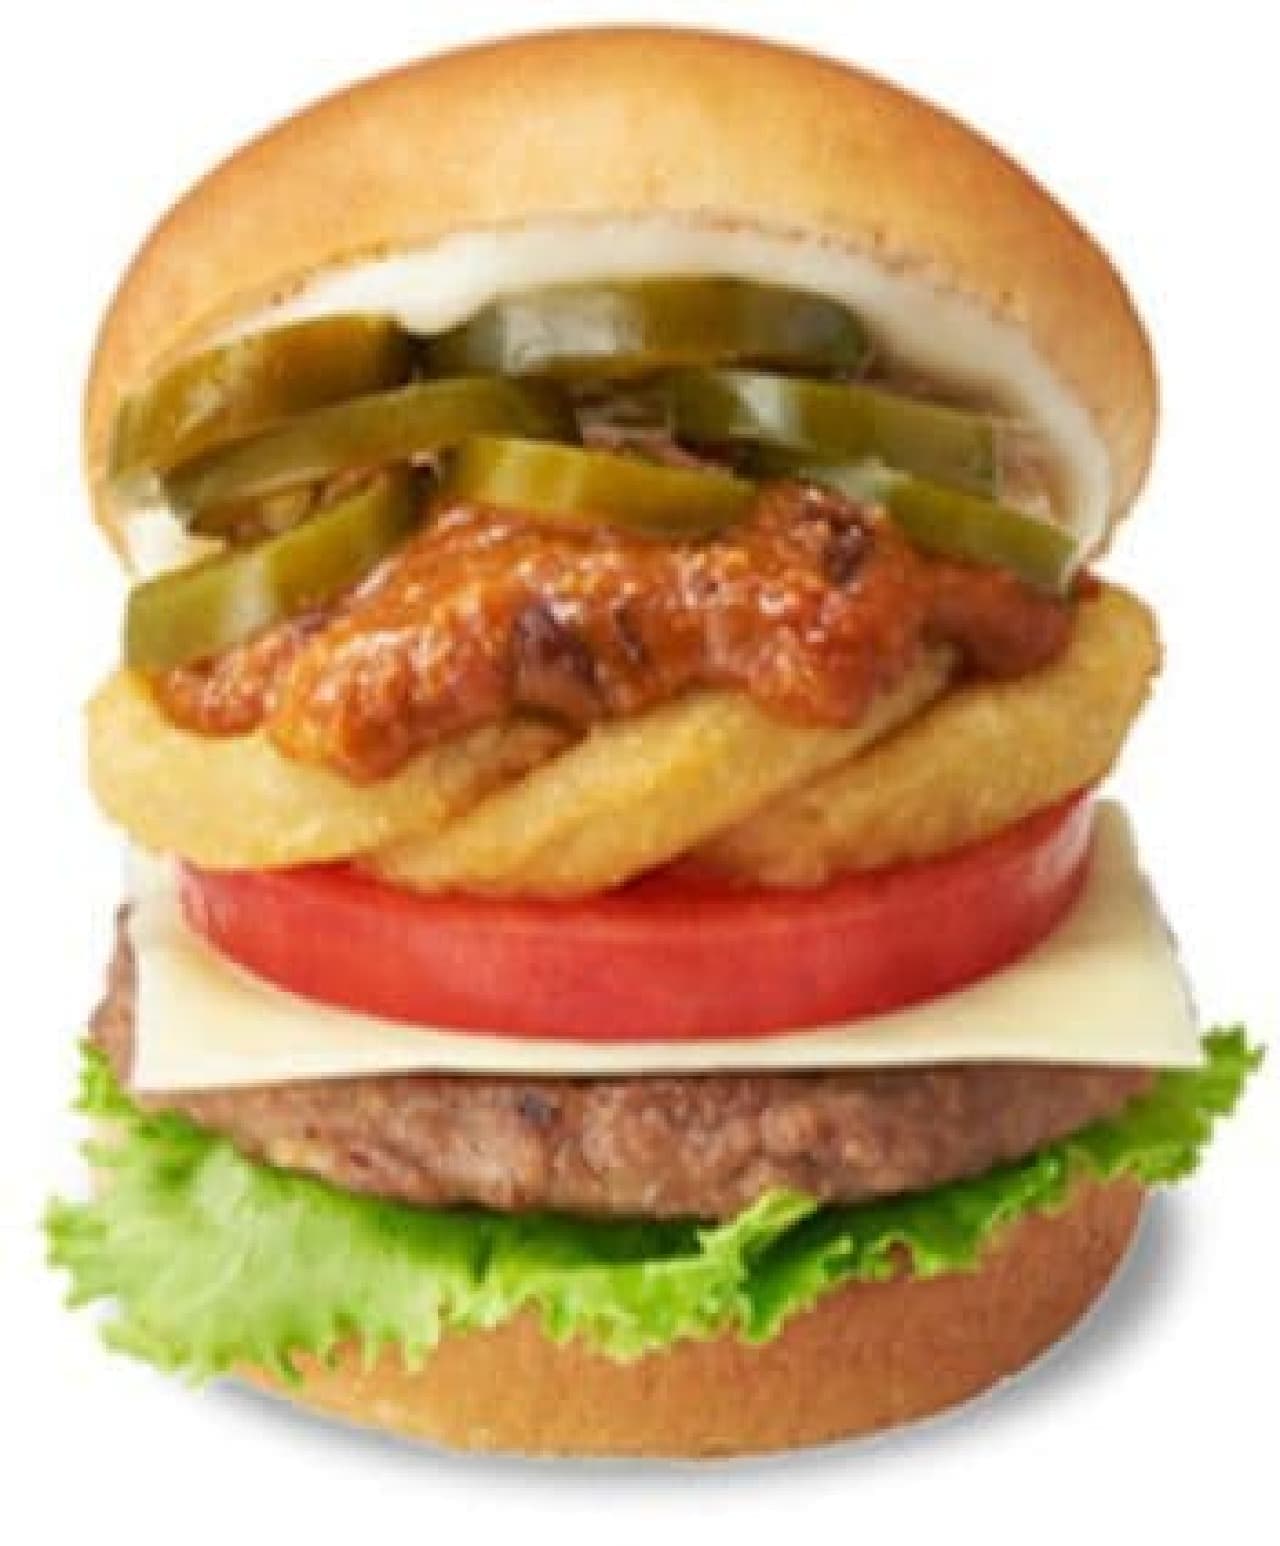 Mos Burger "2 spicy spicy feast chili burger 2 kinds of cheese"